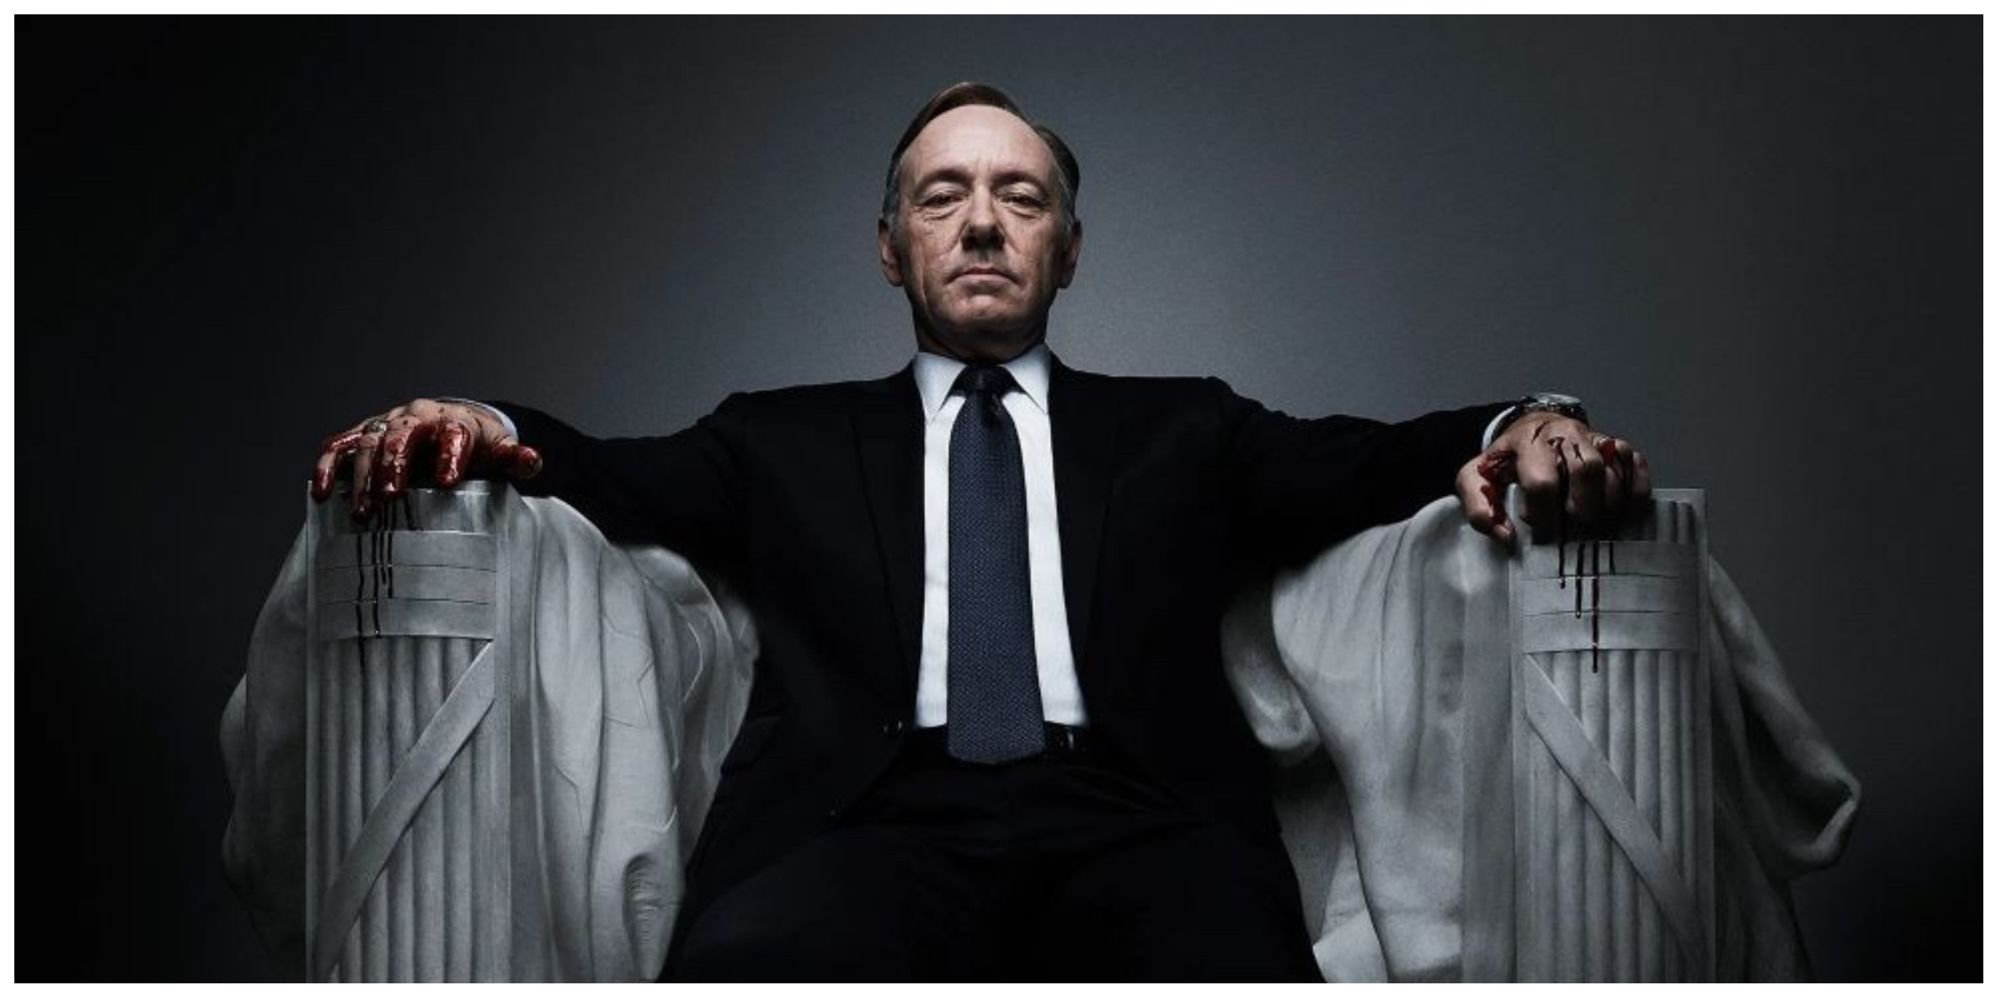 Kevin Spacey as Frank Underwood sitting in House Of Cards poster 